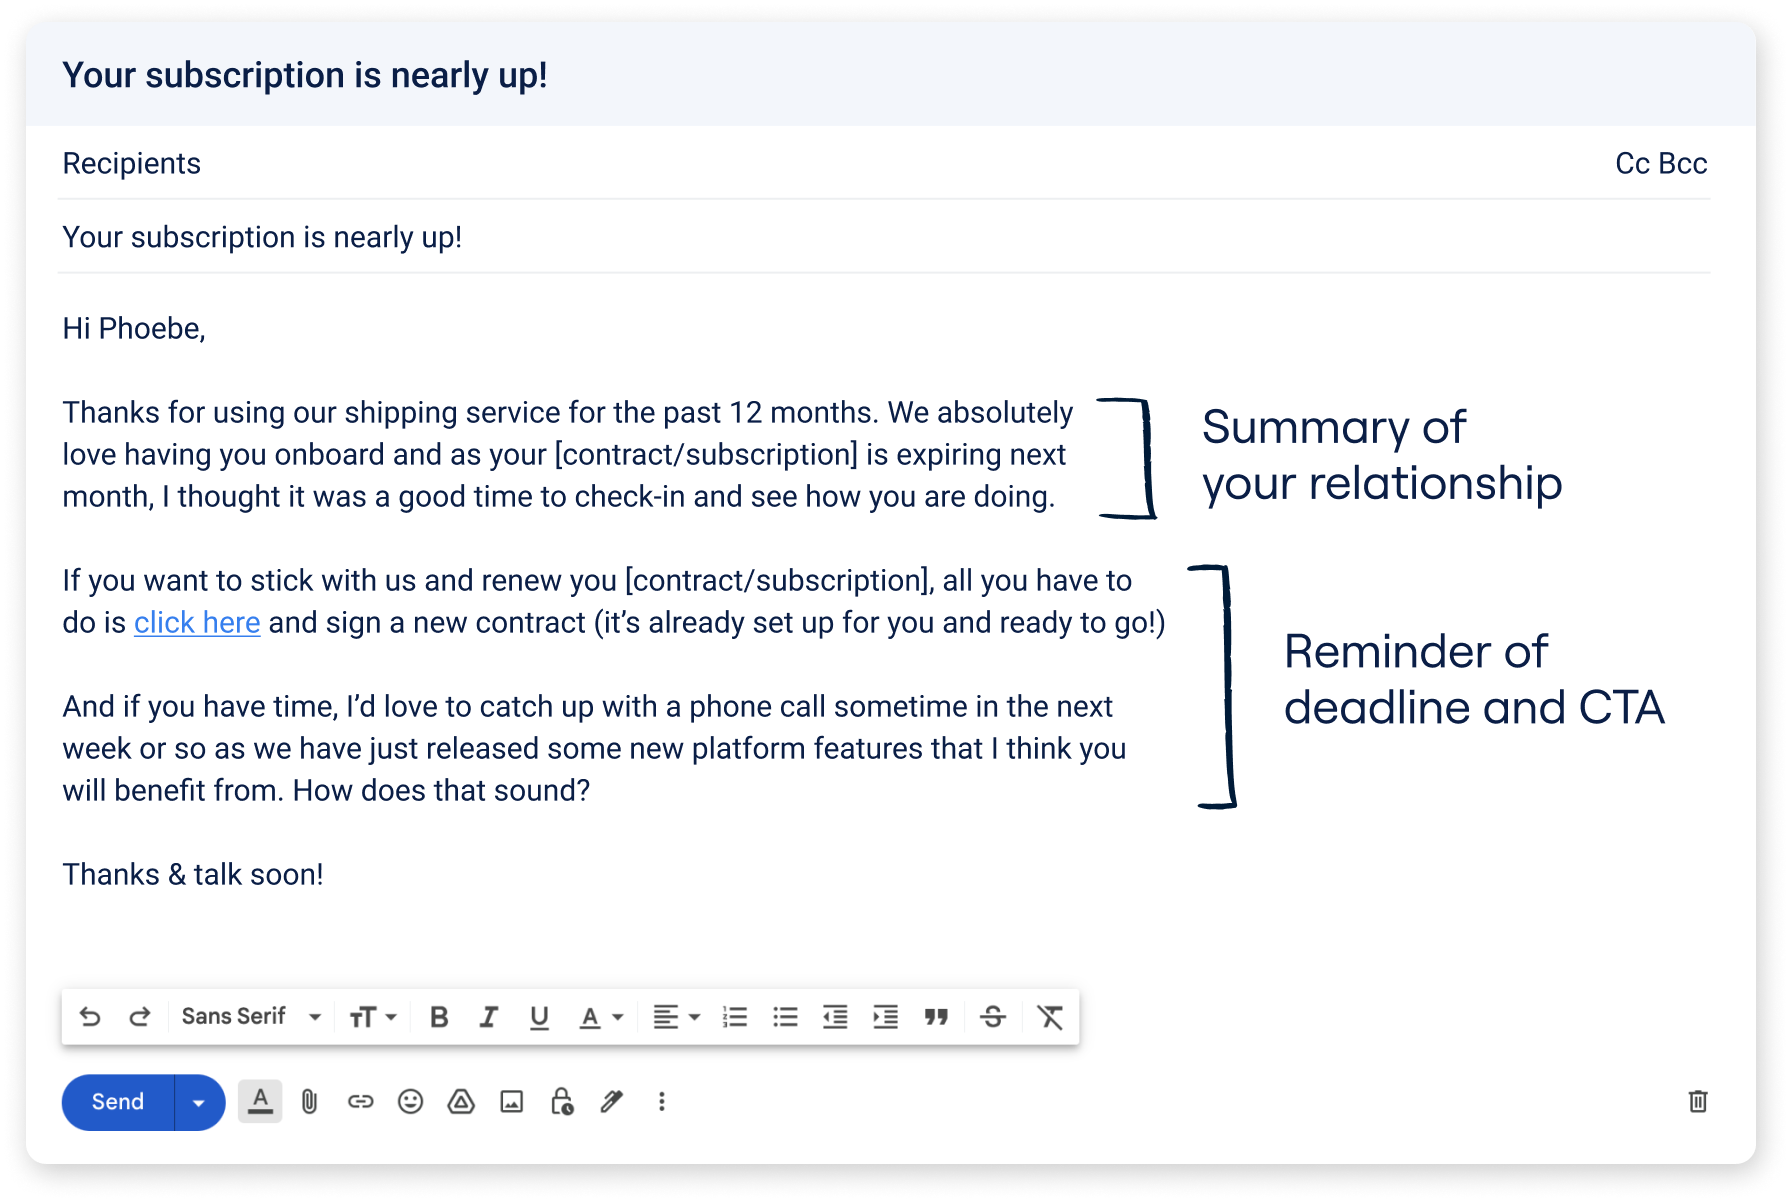 How To Write The Perfect Reminder Email Without Being Pushy